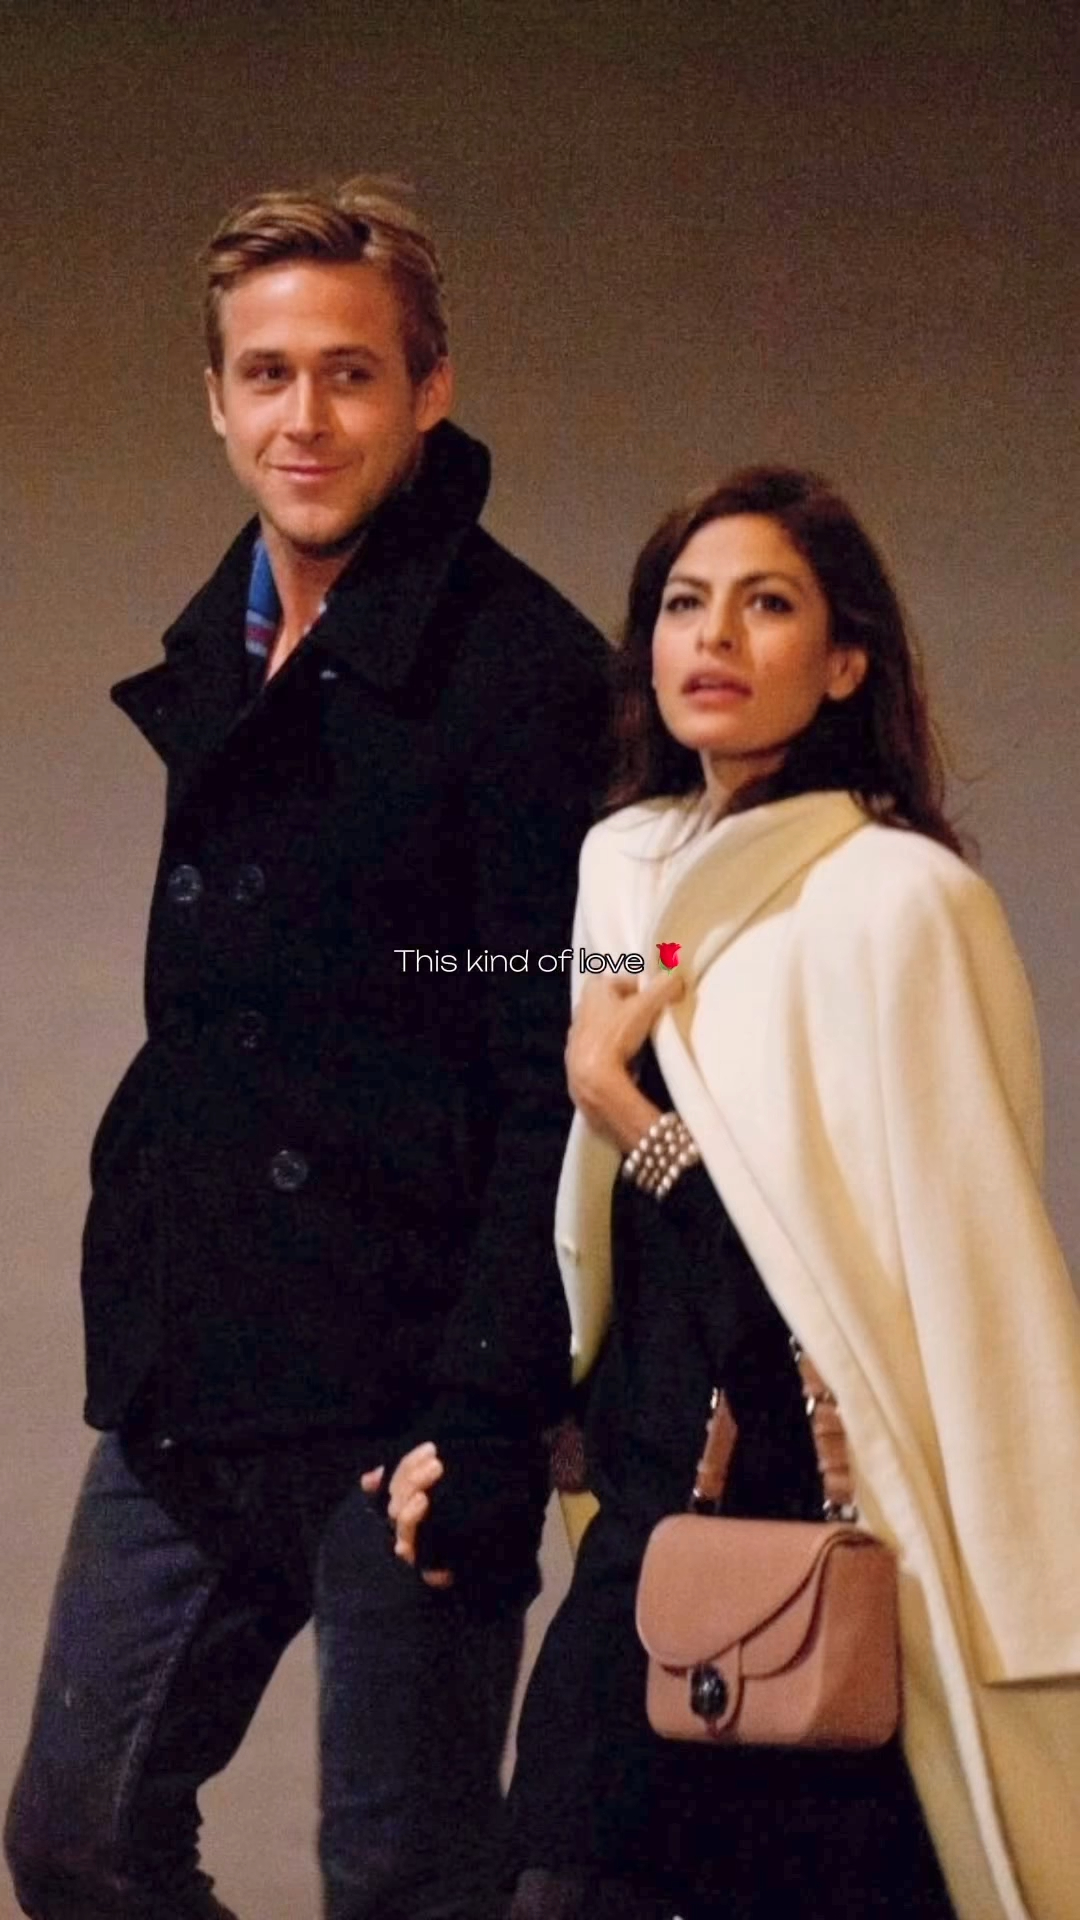 The pics were taken in 2011 of the two lovebirds on a date in Paris, France